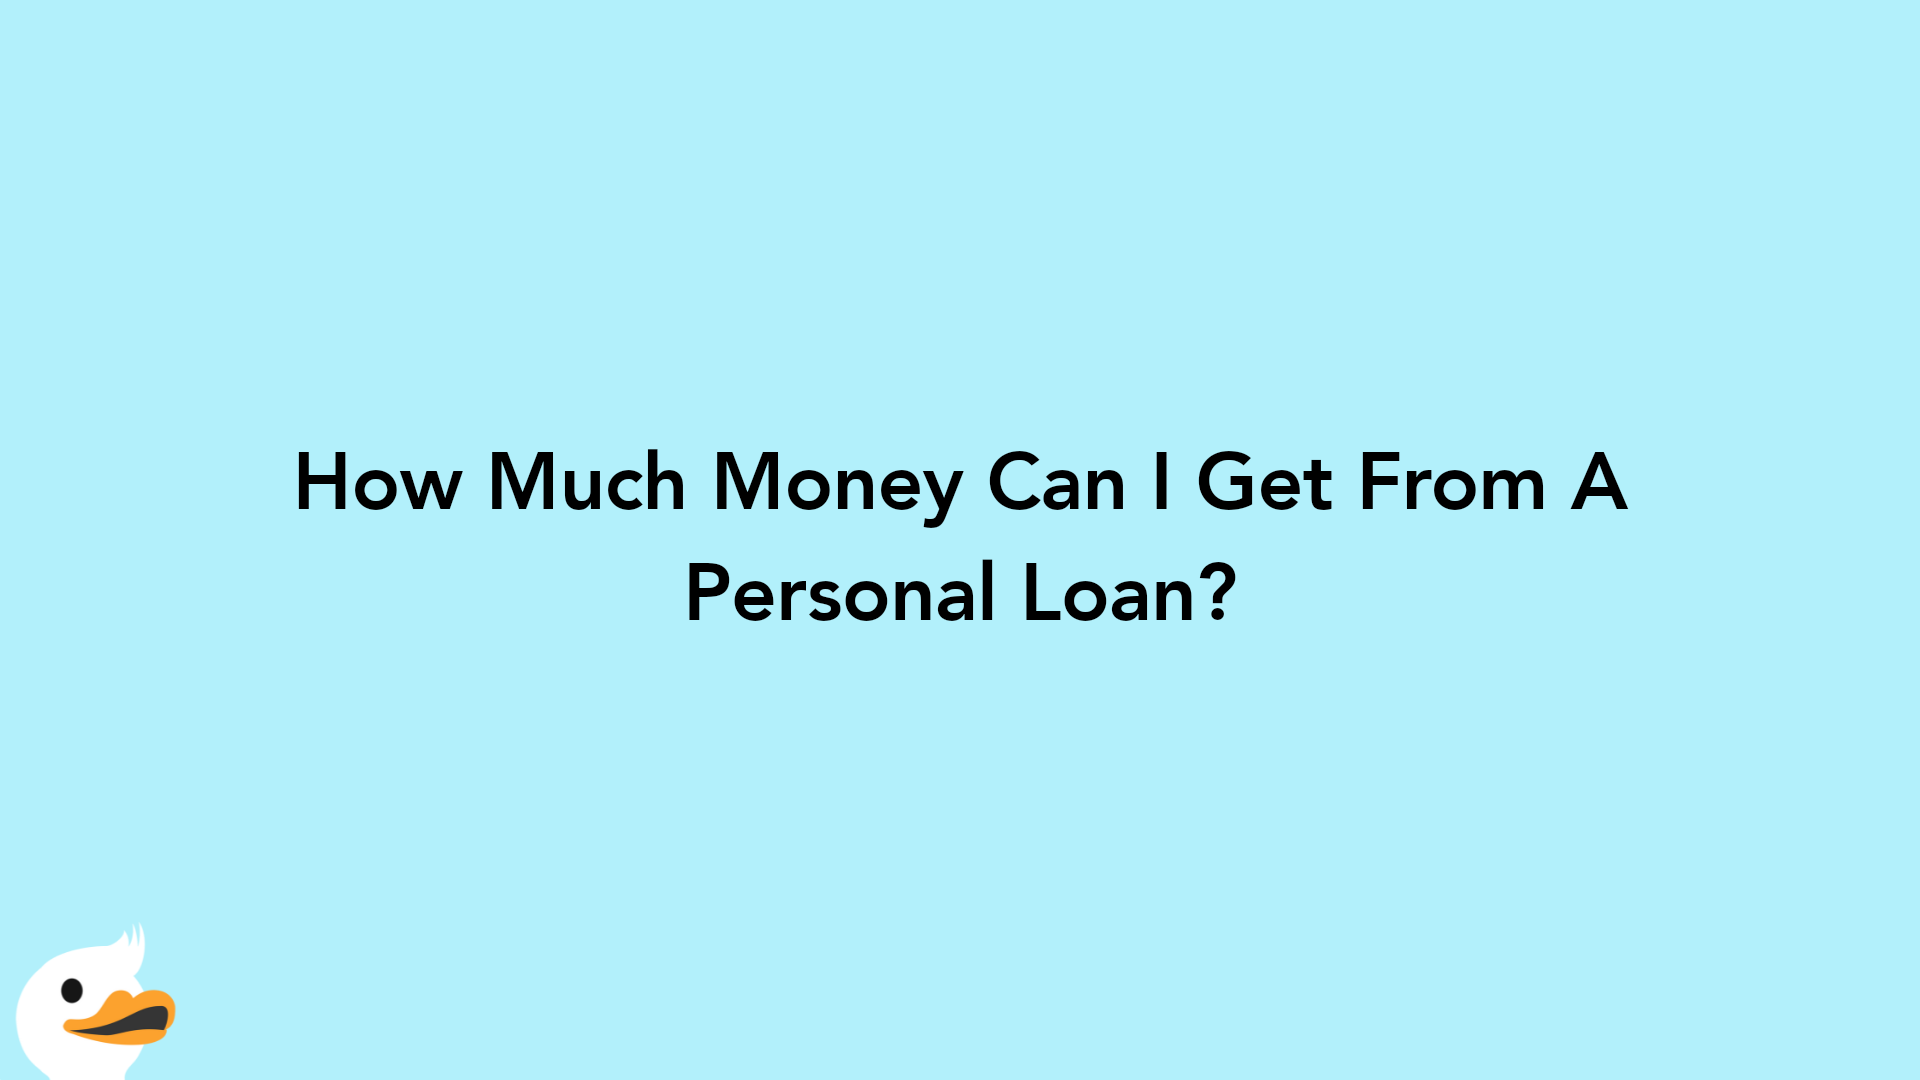 How Much Money Can I Get From A Personal Loan?